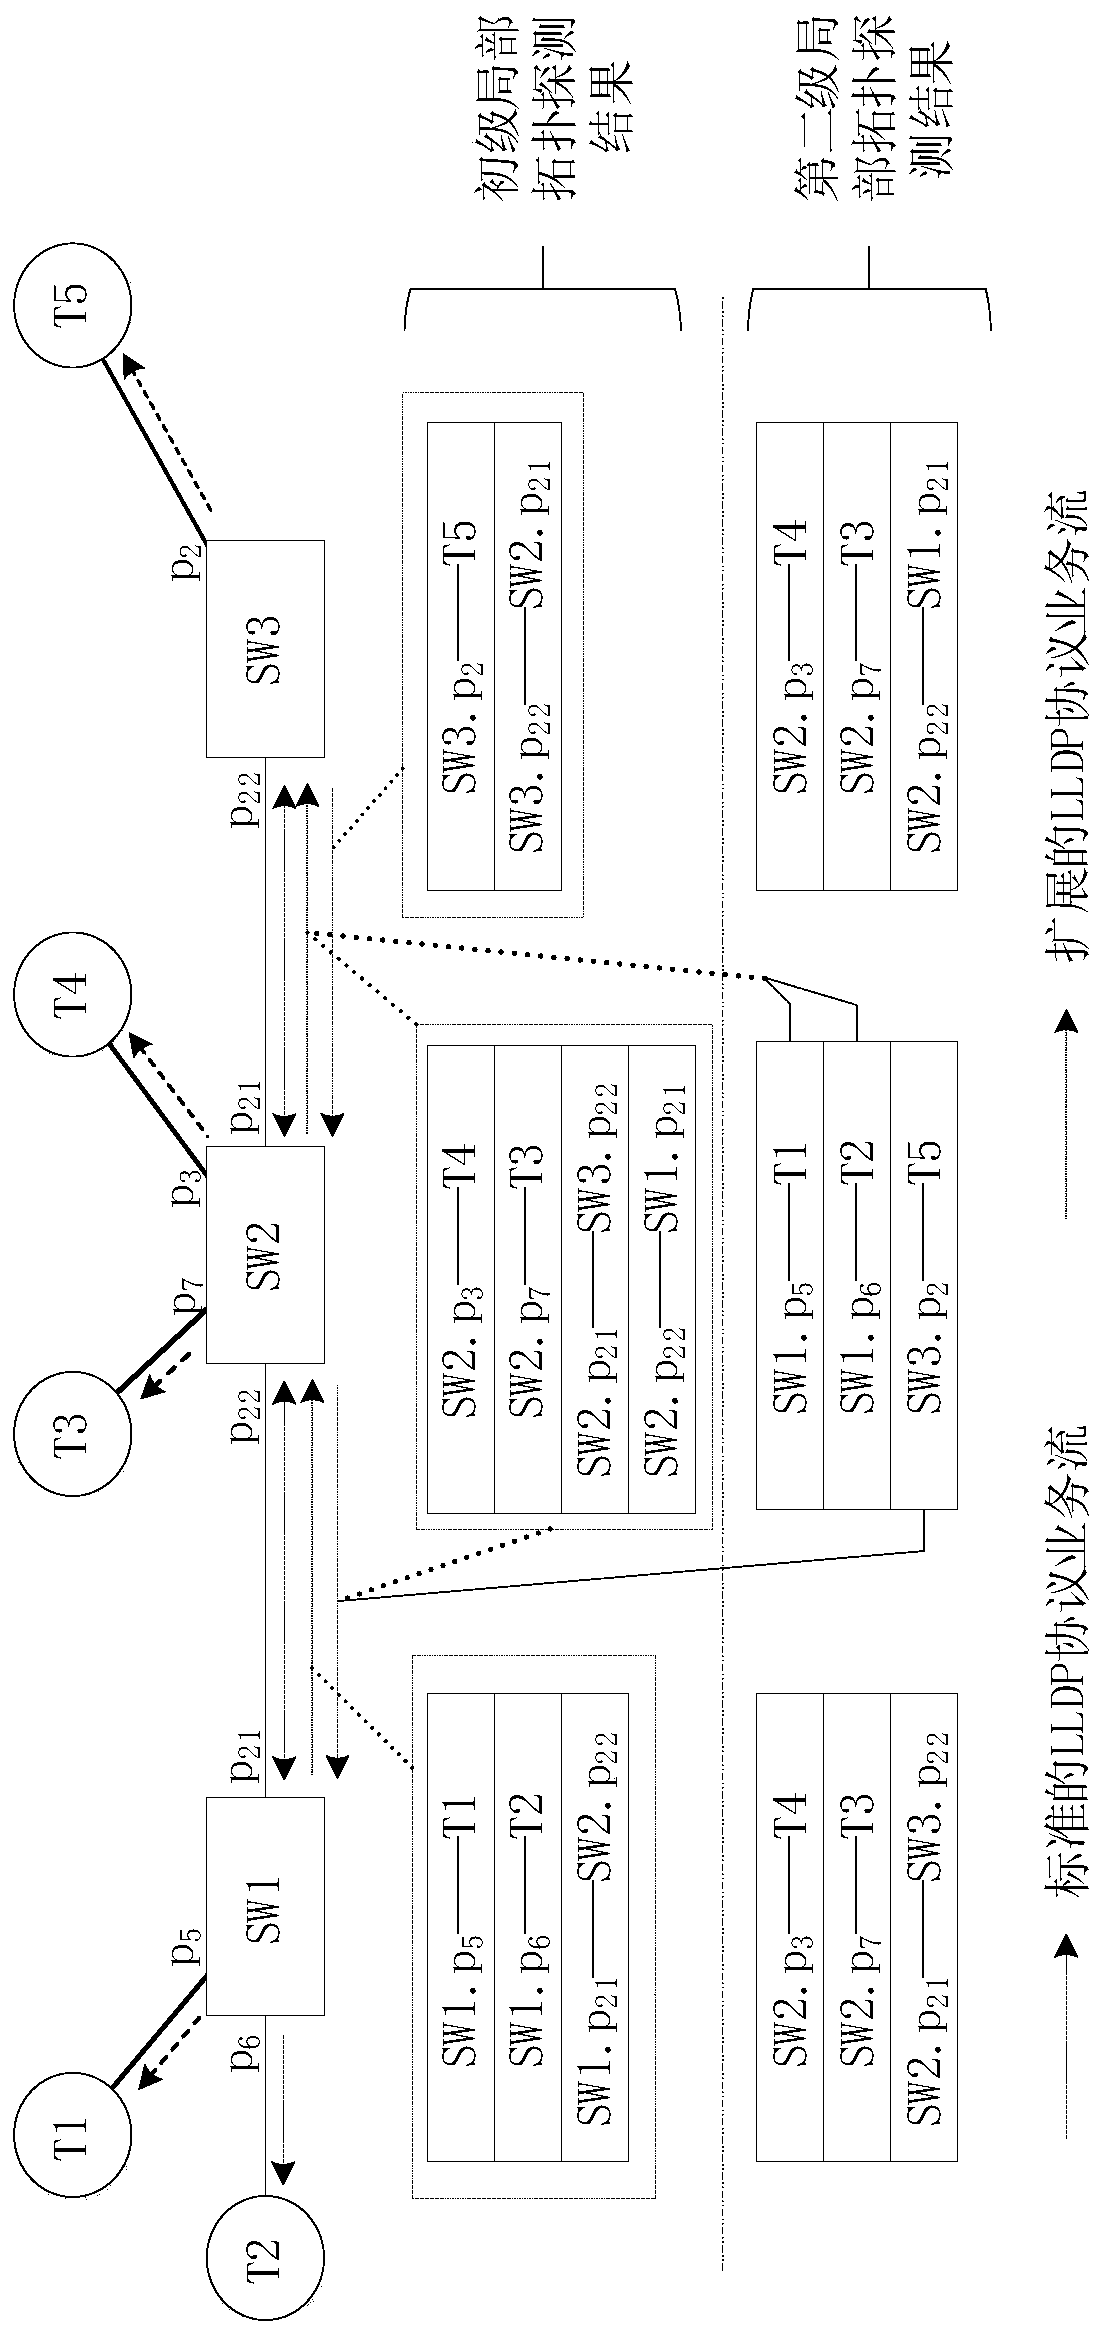 Intelligent substation network topology step-by-step sniffing method based on LLDP protocol